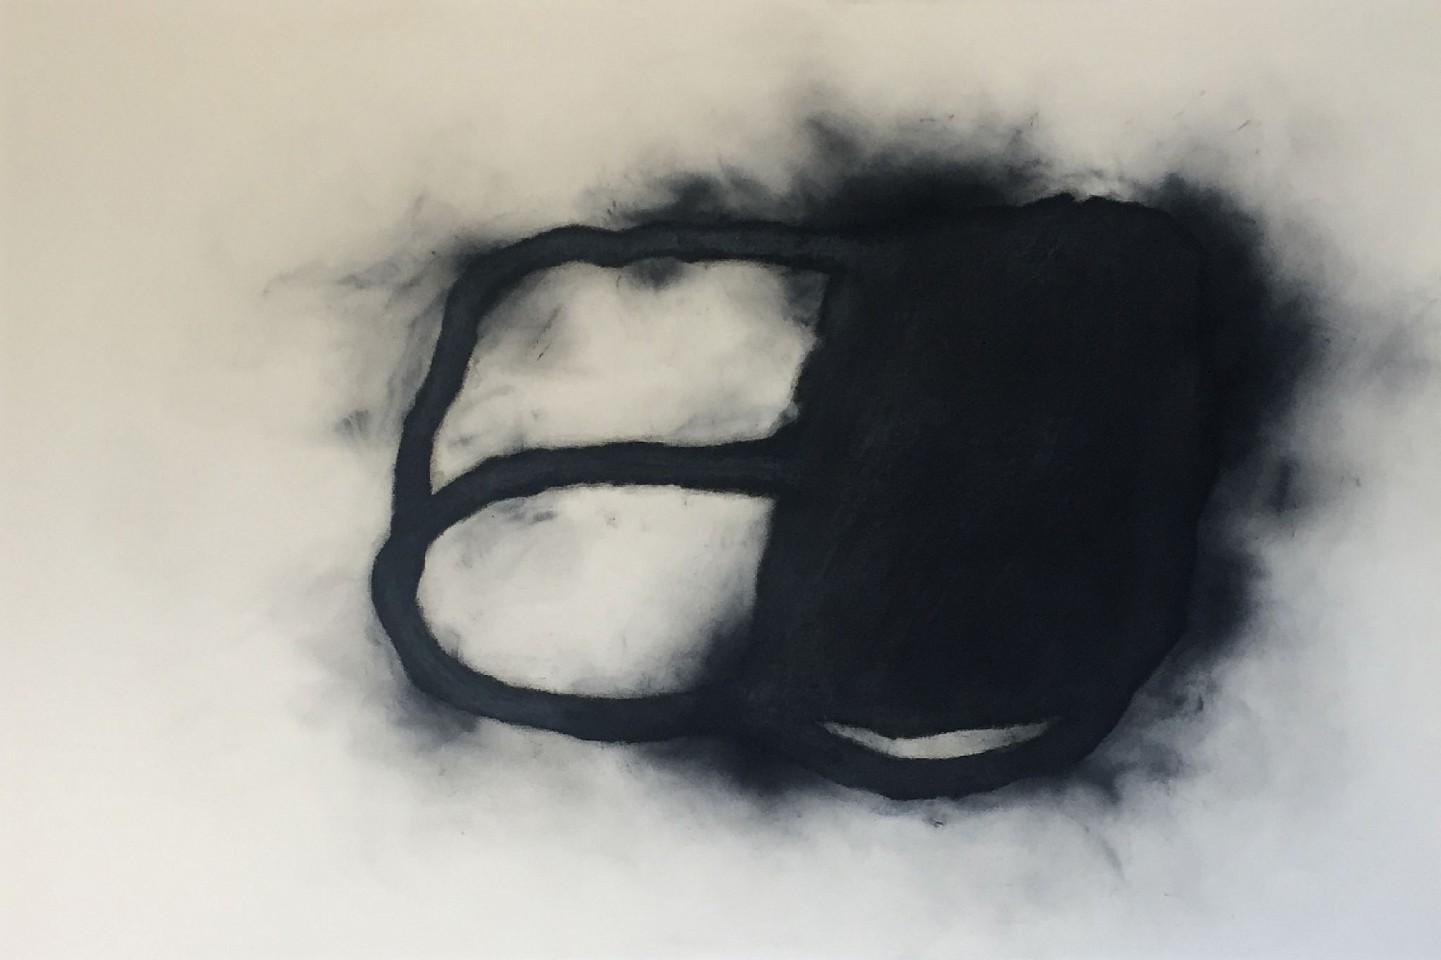 UDO NÖGER, Twenty two hours of dreams No50, 2018
charcoal on canvas, 48 x 72 in. (121.9 x 182.9 cm)
NU-C-0186